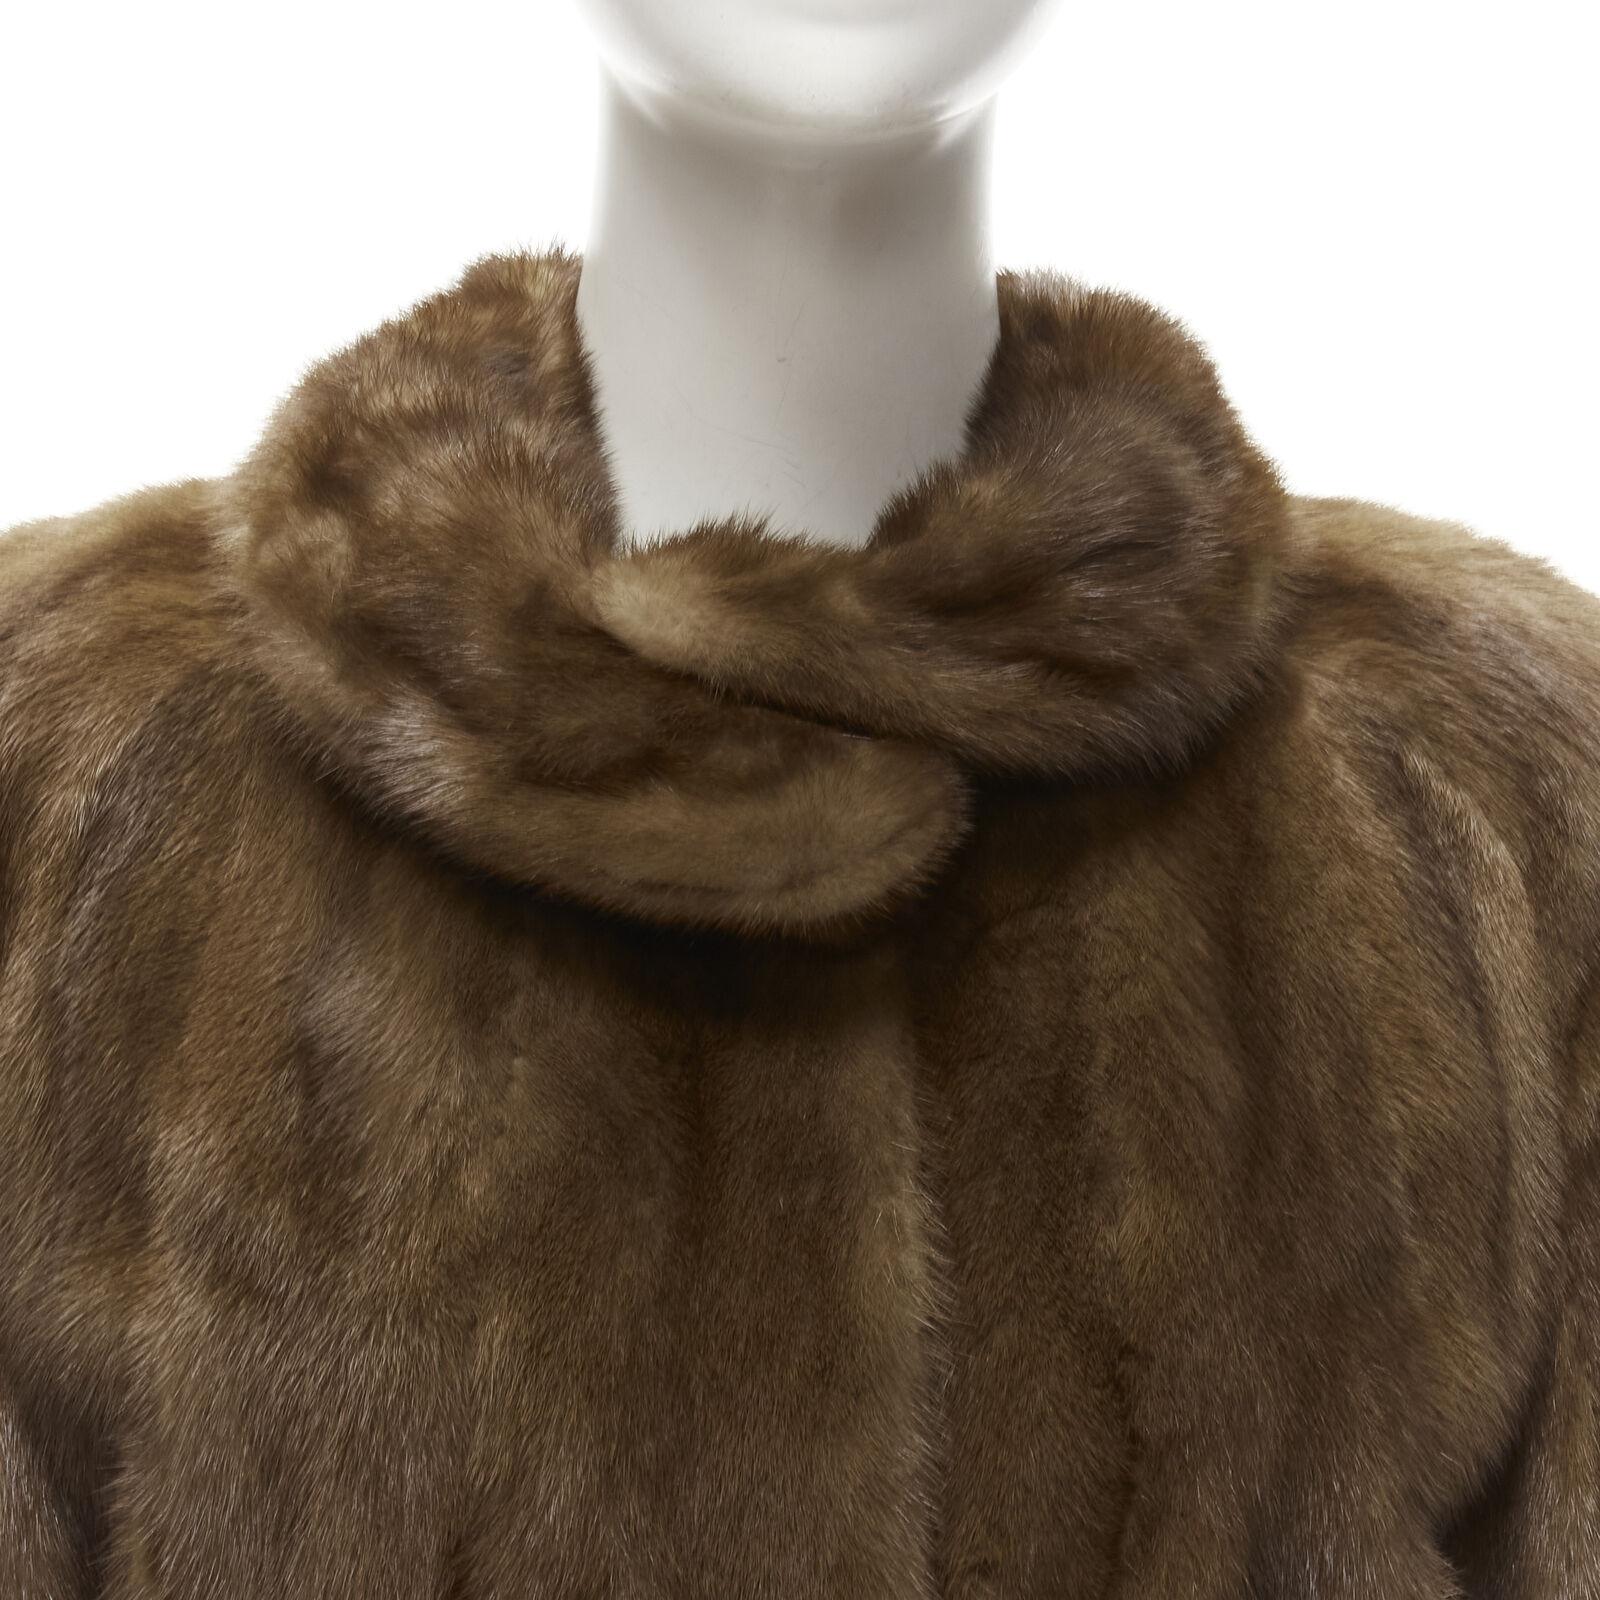 M JACQUES brown fur peter pan collar long sleeve hook eye coat jacket
Reference: ANWU/A00954
Brand: M Jacques
Material: Fur
Color: Brown
Pattern: Solid
Closure: Hook & Eye
Lining: Fabric

CONDITION:
Condition: Excellent, this item was pre-owned and